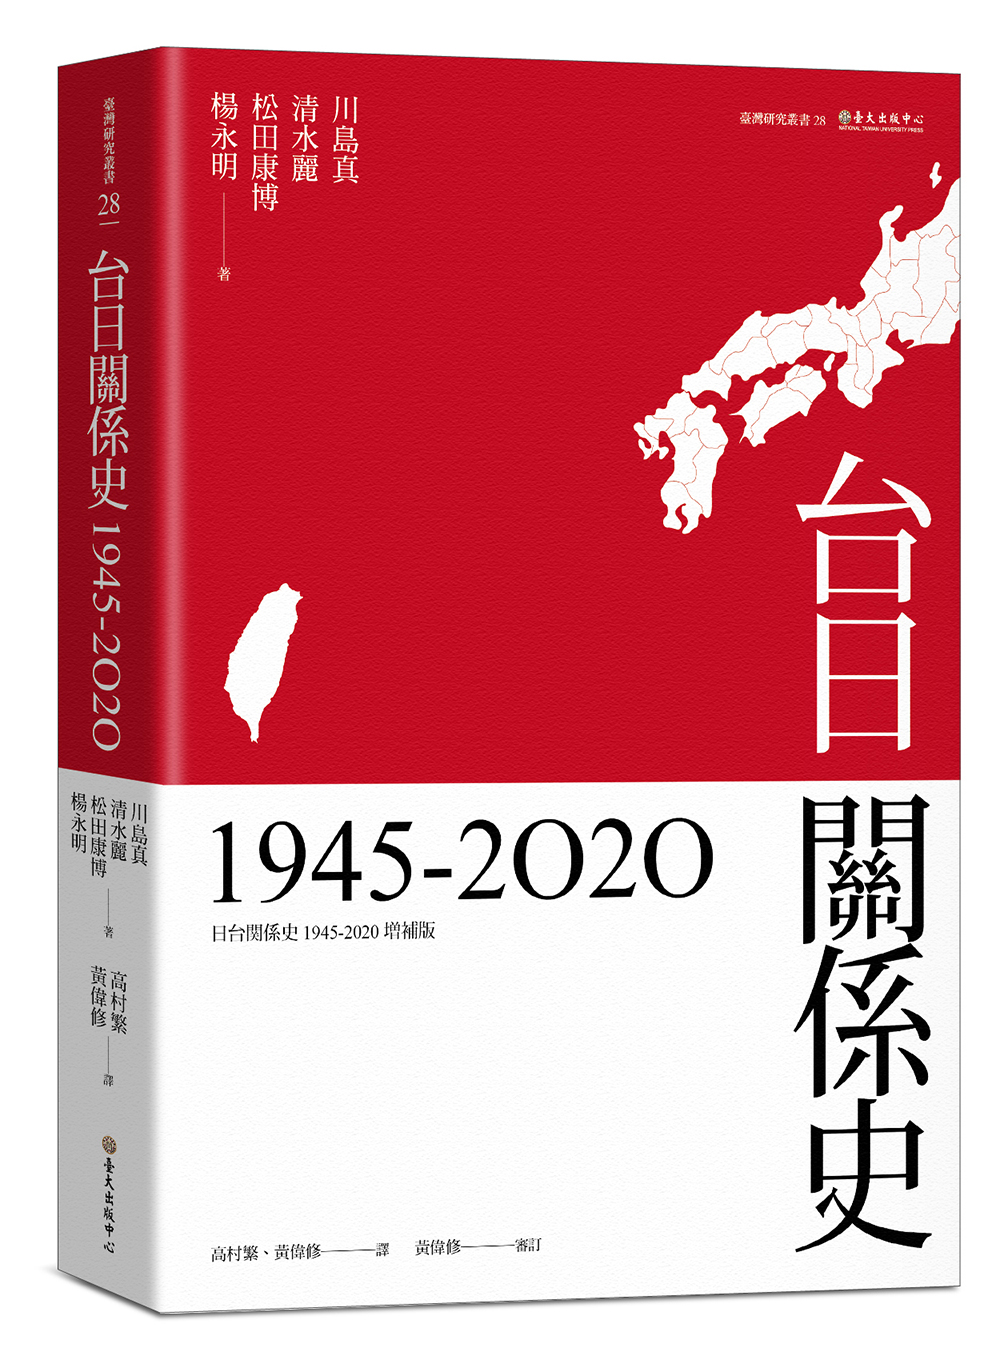 A History of Japan-Taiwan Relations, 1945-2020